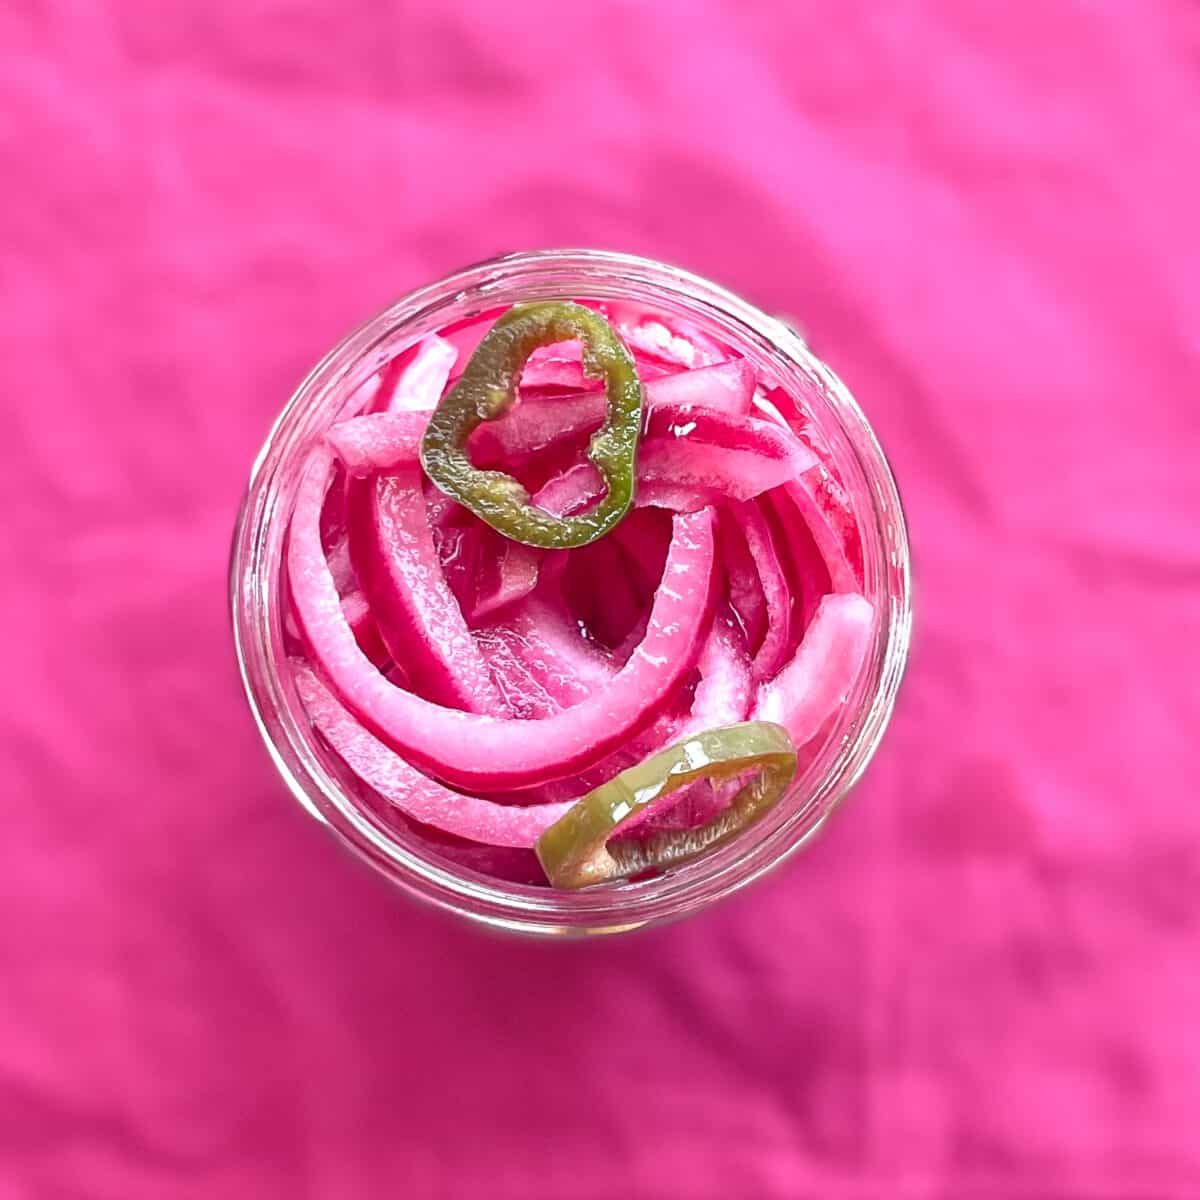 a glass jar of spicy pickled onions with sliced jalapeno peppers.